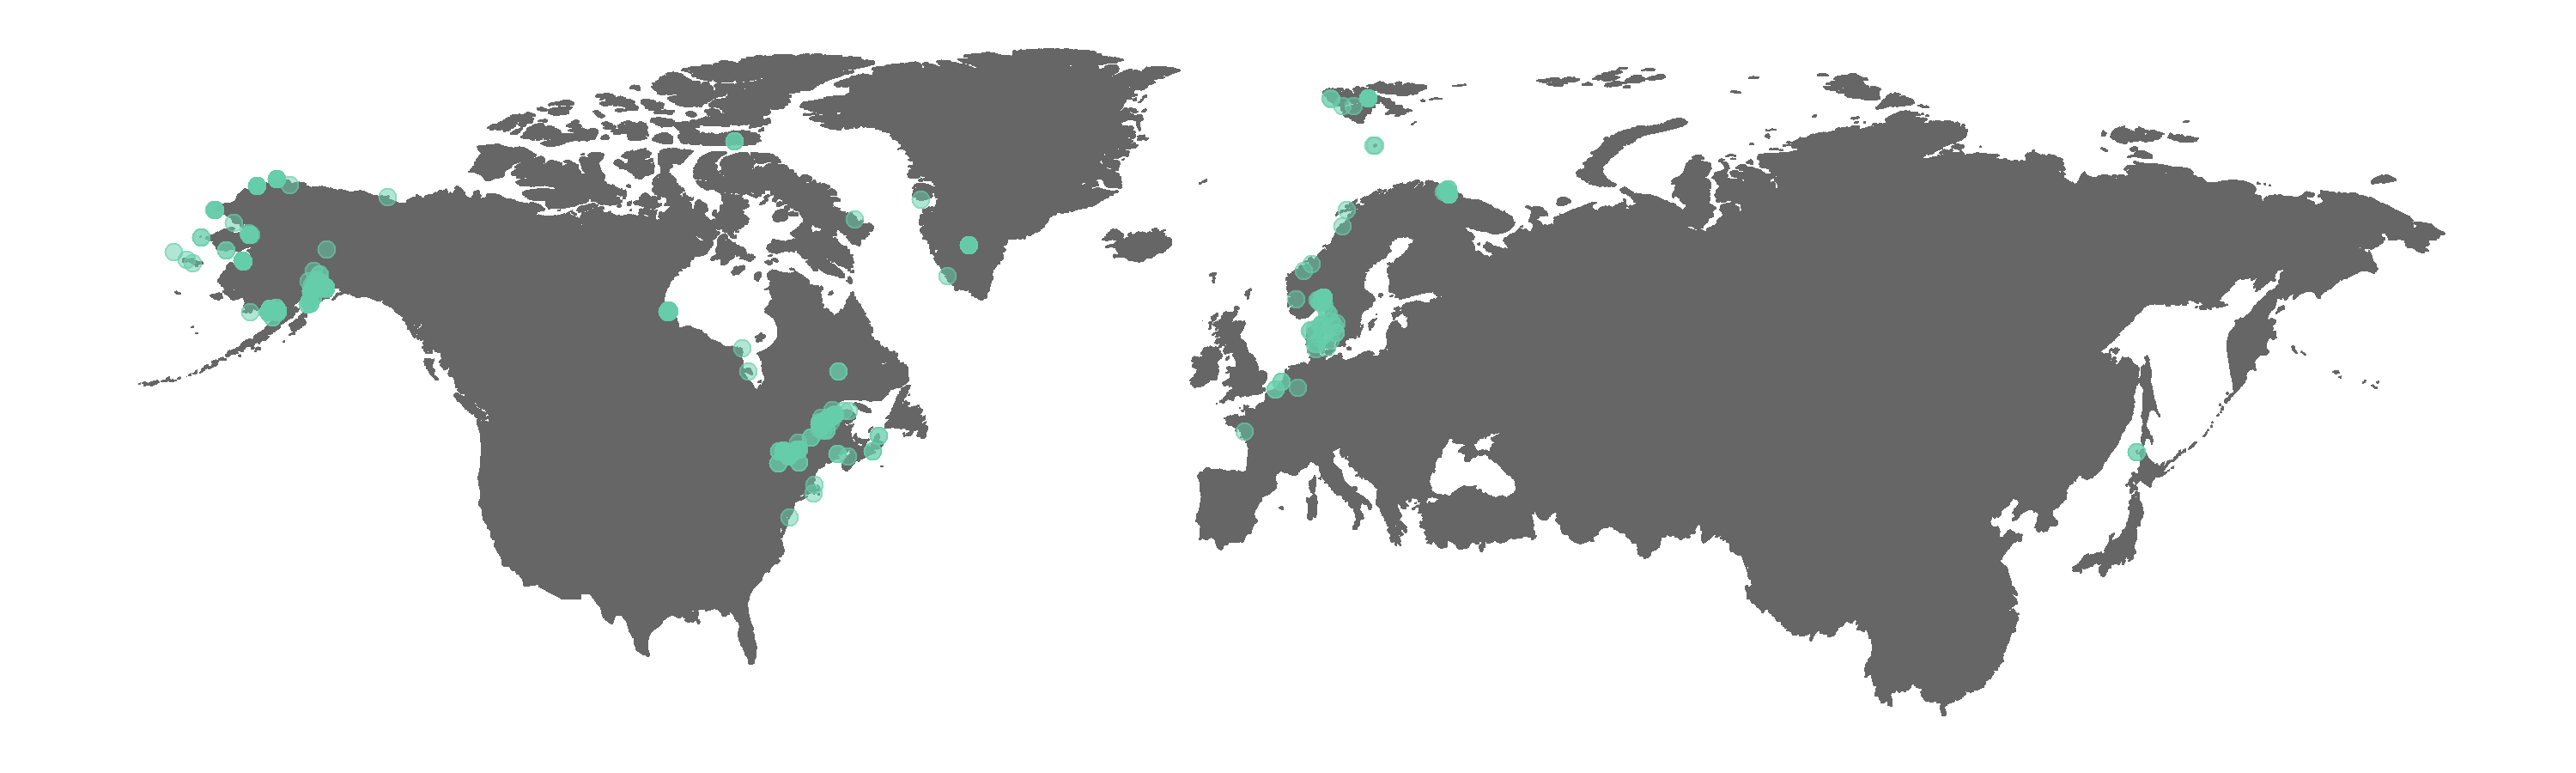 Figure 2. Map of GBIF occurrences for the beluga whale after filtering for records that passed the coordinate validity tests.